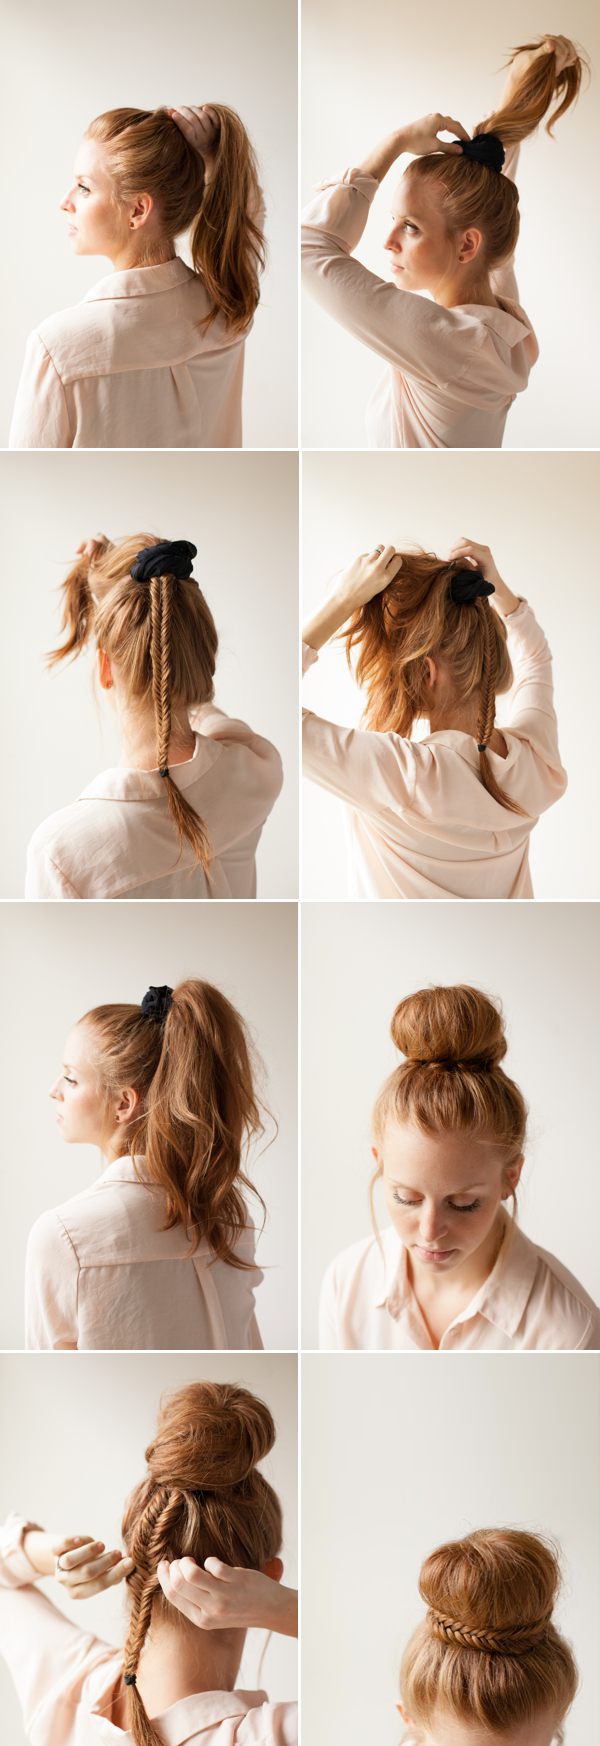 18 Easy Step by Step Tutorials for Perfect Hairstyles - Style Motivation